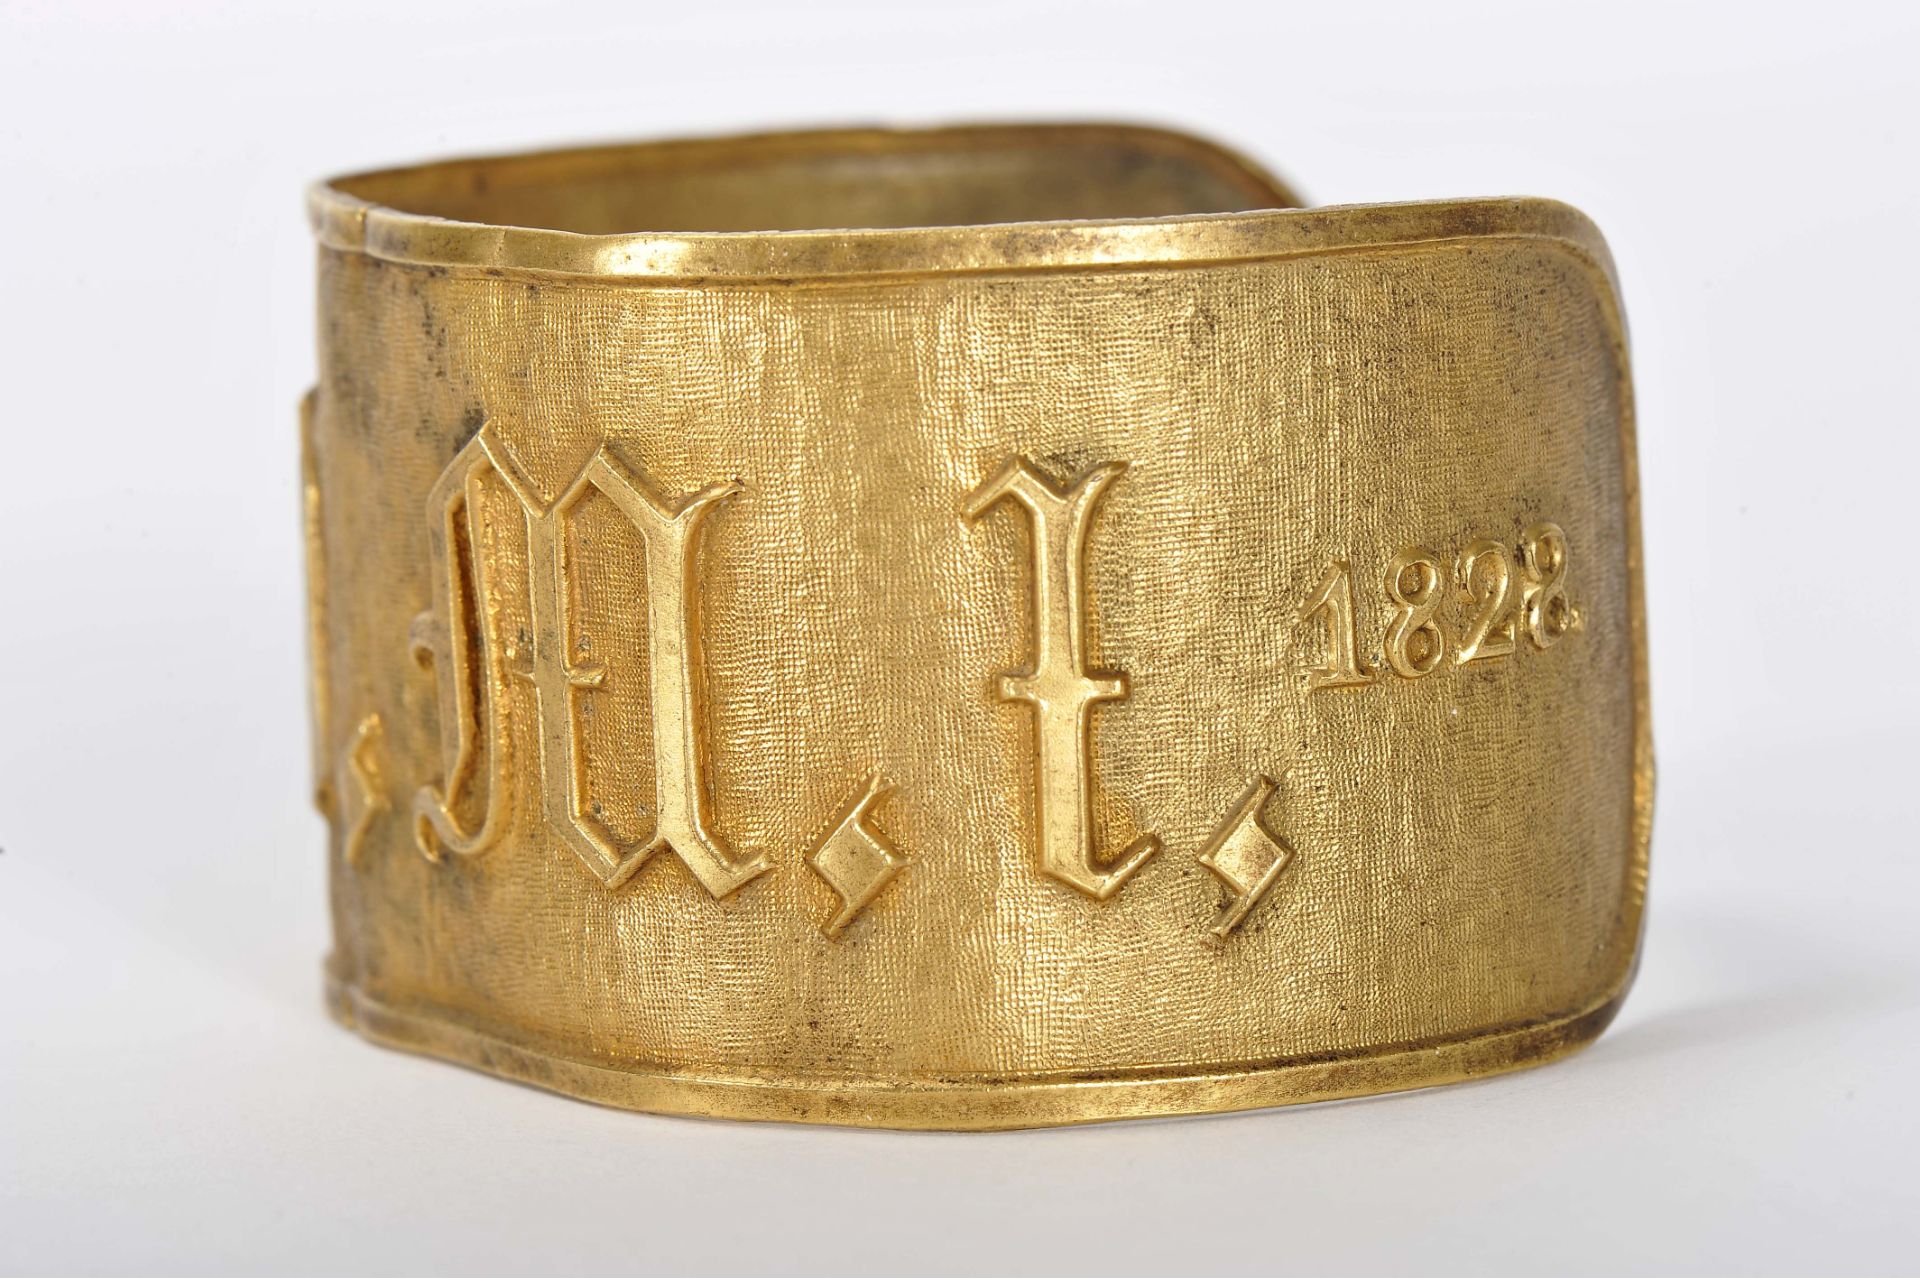 Commemorative bracelet of the entry of King D. Miguel I of Portugal in Lisbon - Image 3 of 3